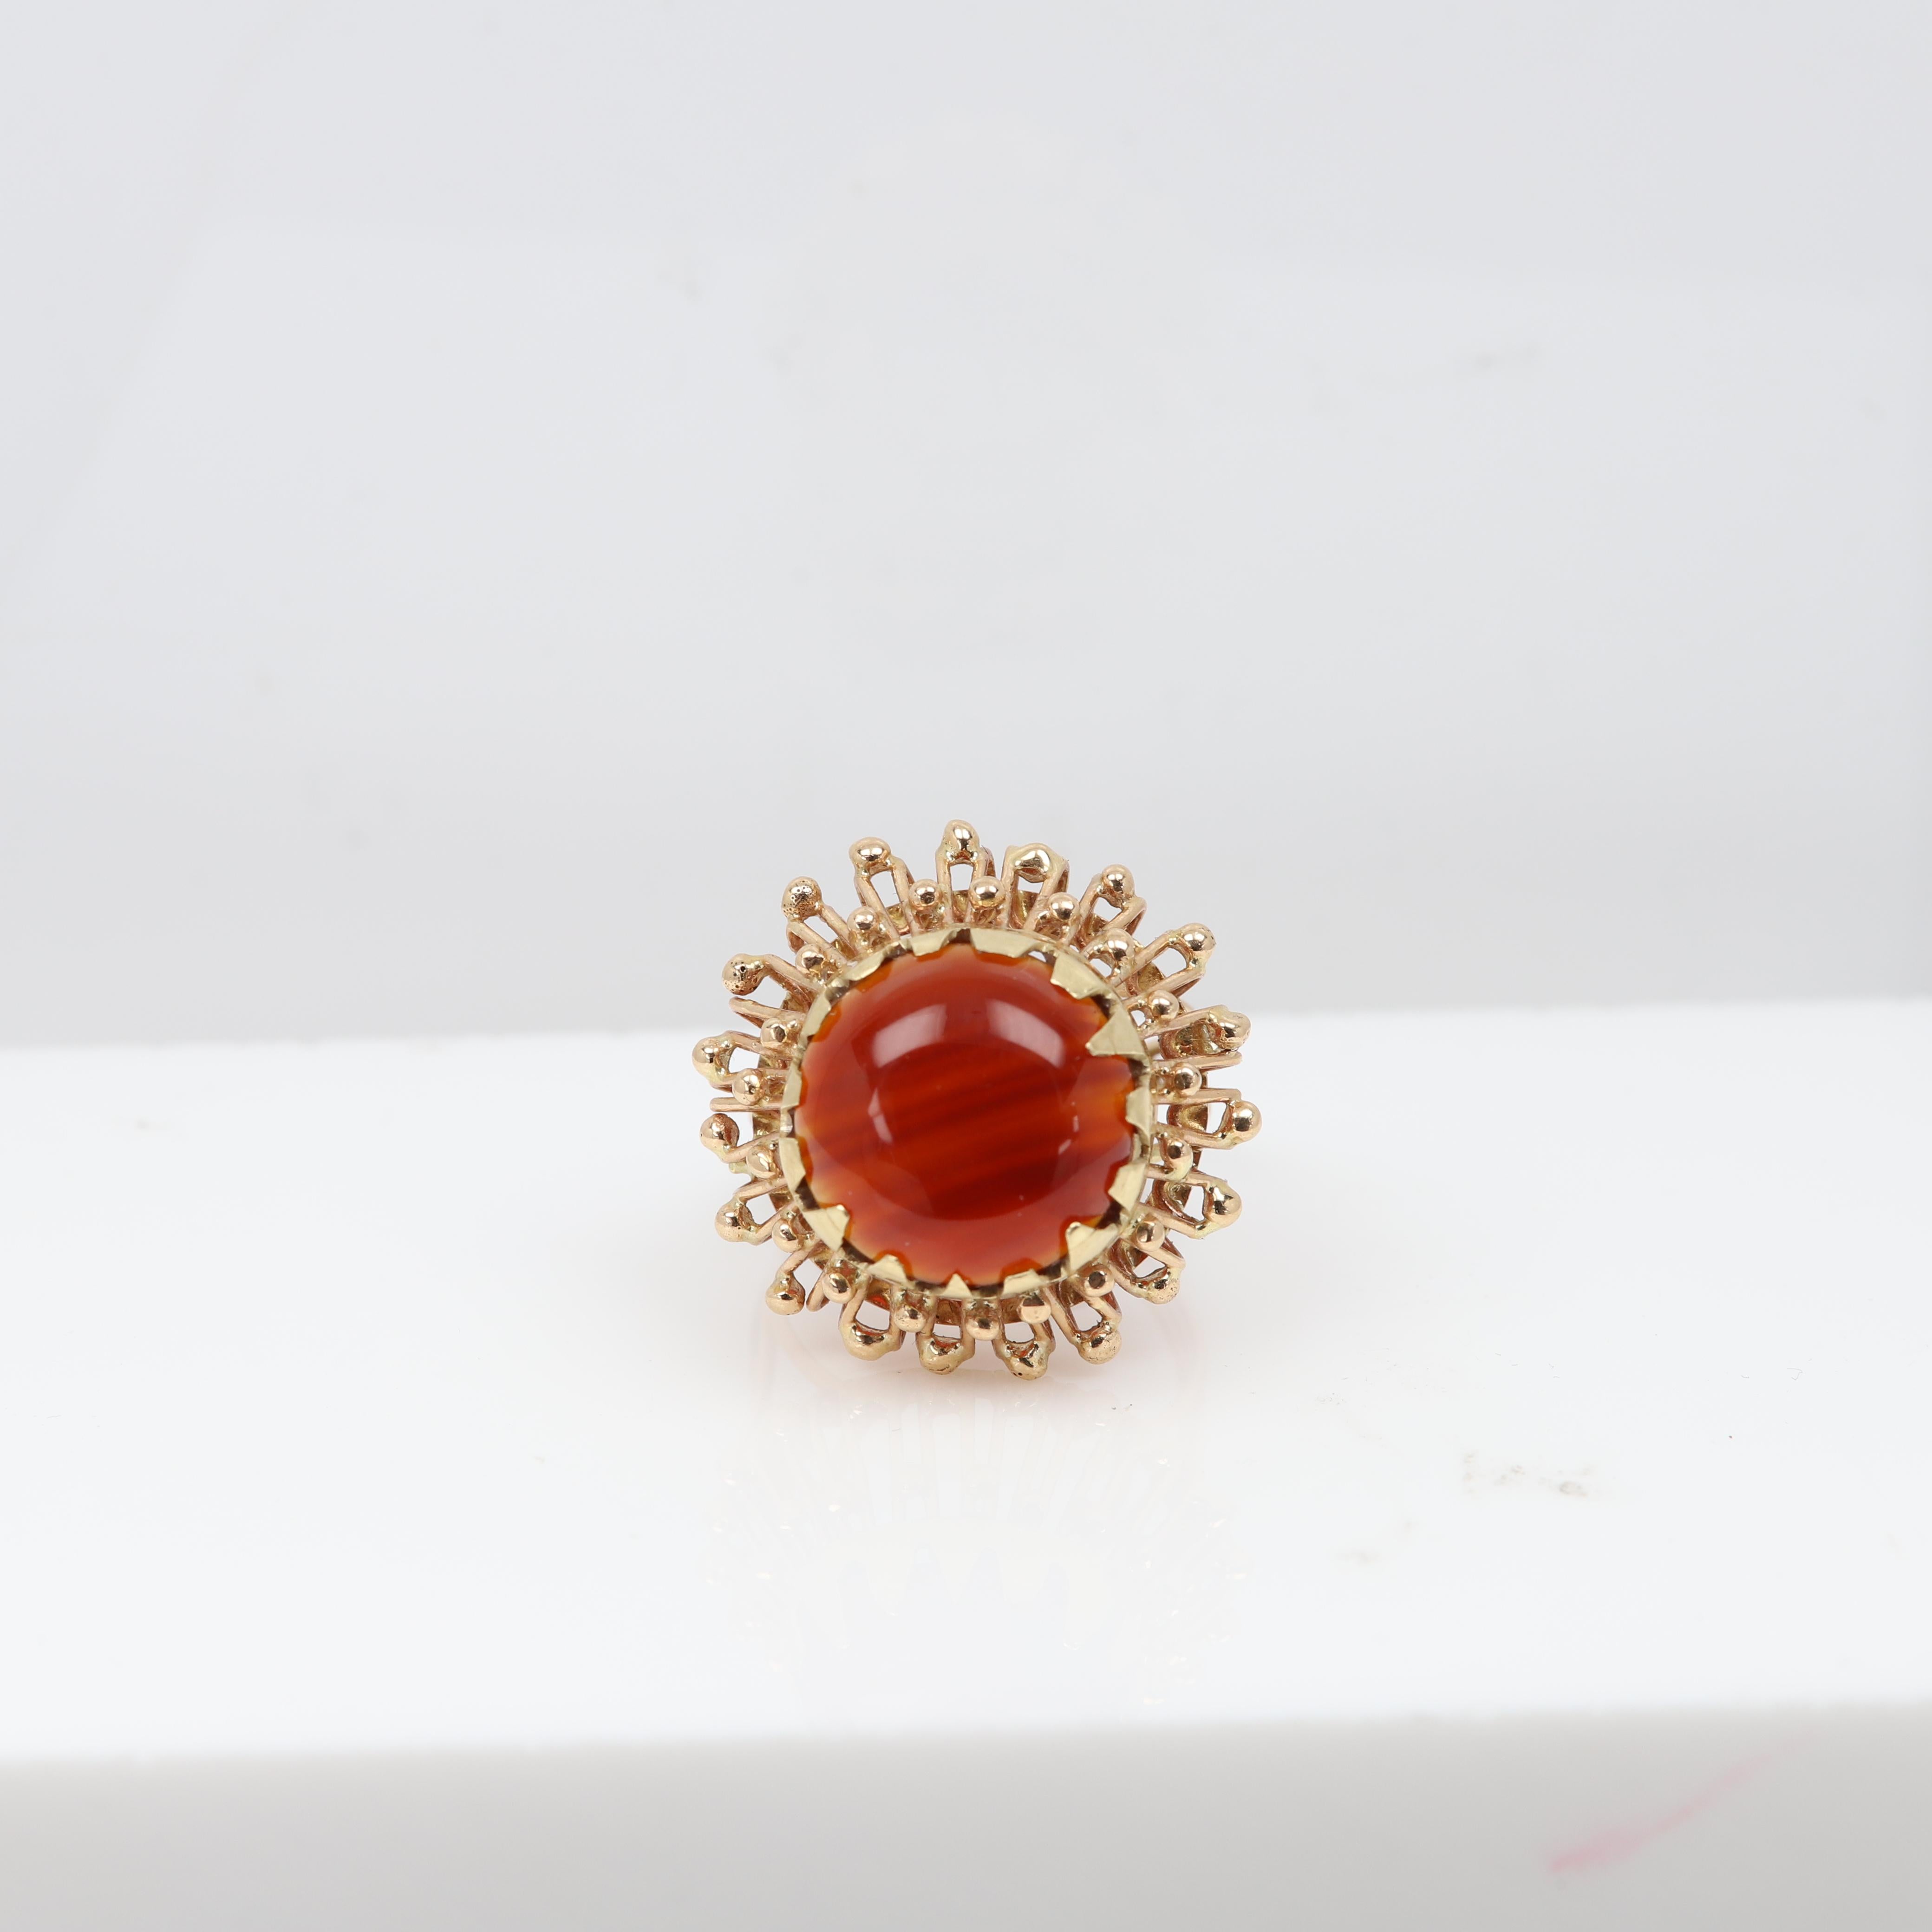 Brilliant orange color - round Carnelian gemstone
circa 1940-1950
pre-owned however in great shape.
Weight: 8.5 grams
14k Rose Gold 
The Hand work is very visible.
Finger size - will fit well size 7 and size 7.5, since the finger area is made out of